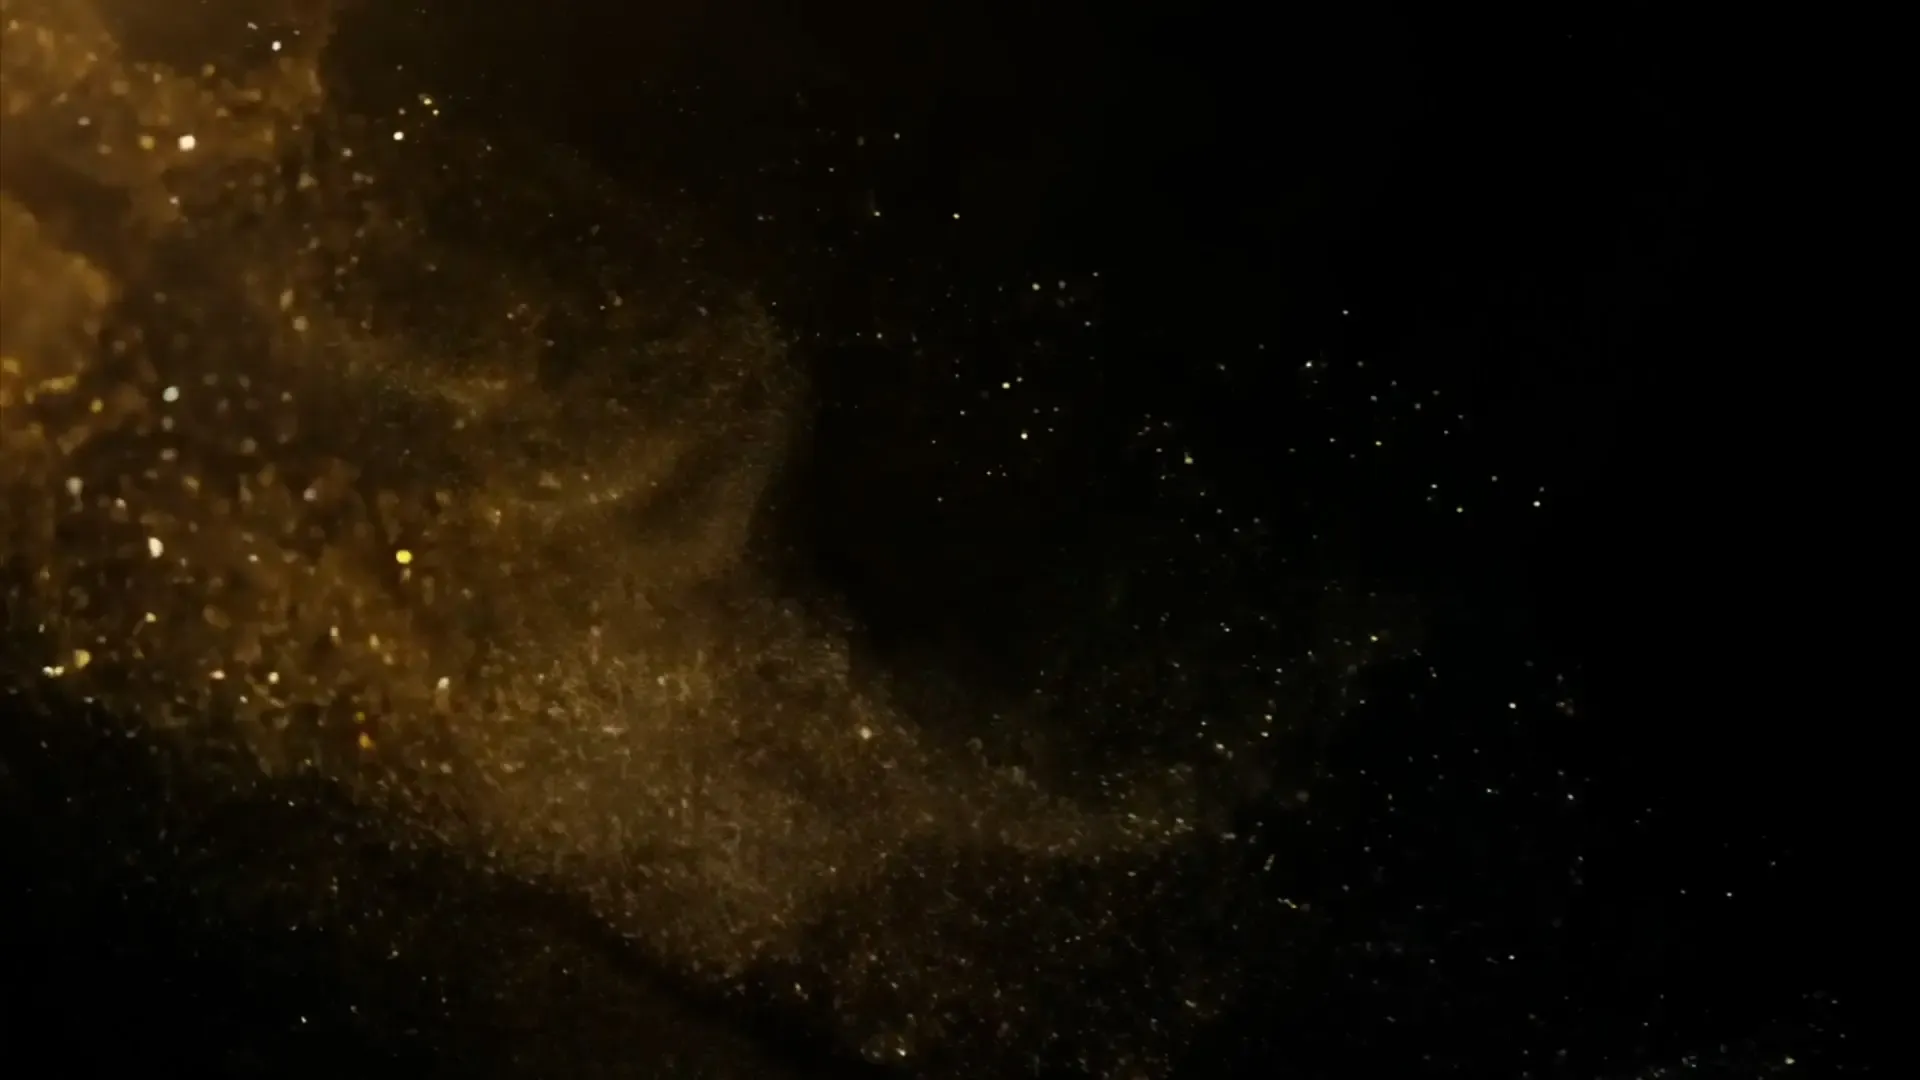 Shimmering Gold Particle Effect Overlay